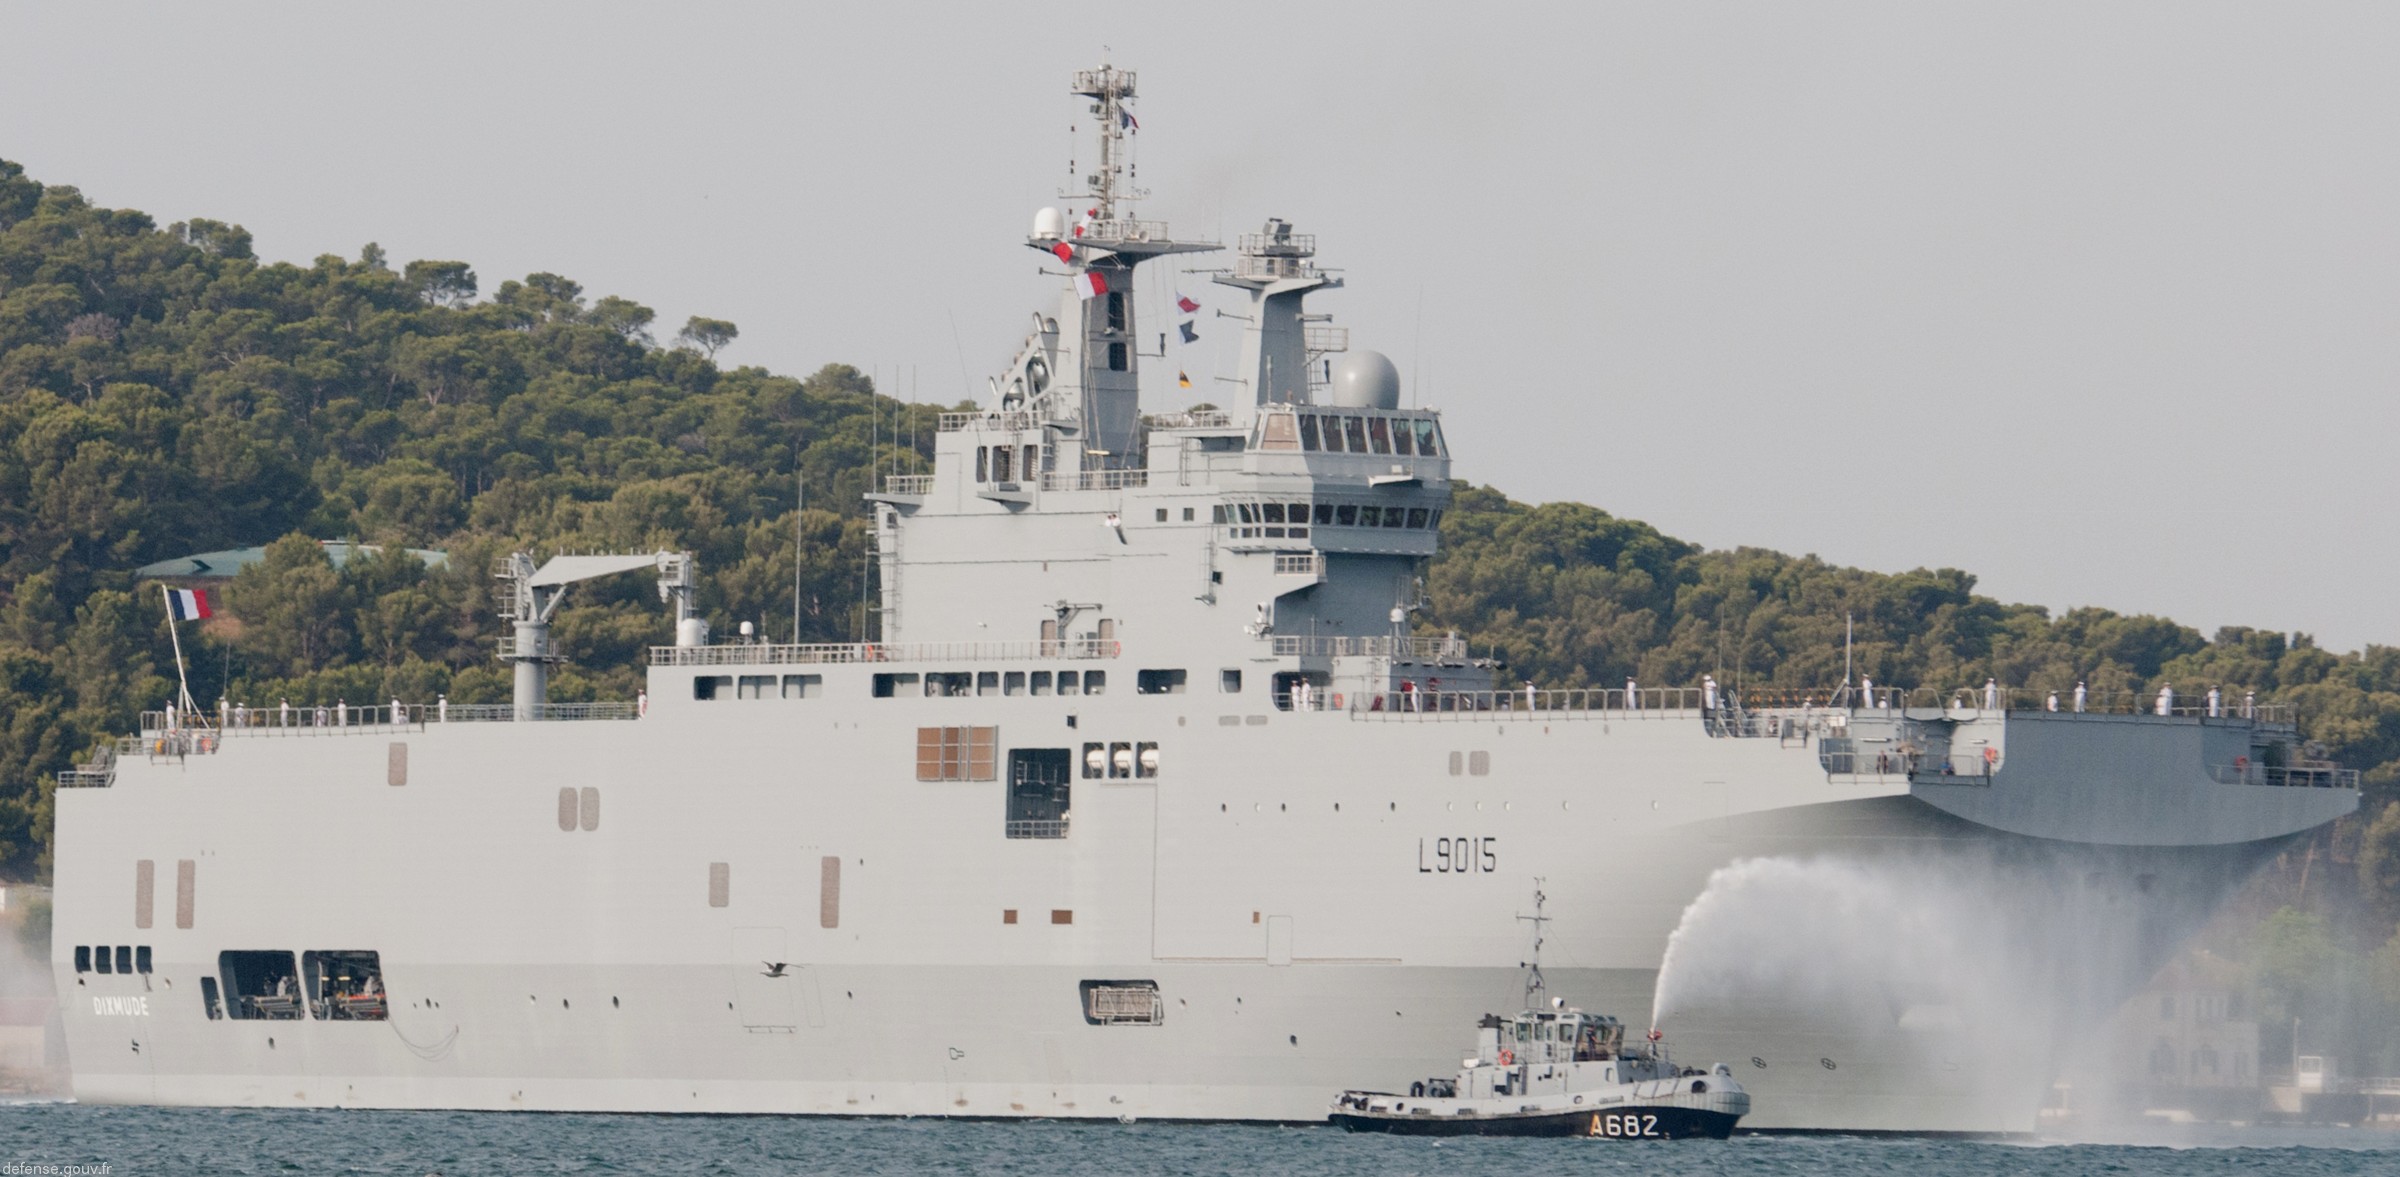 l-9015 fs dixmude mistral class amphibious assault command ship bpc french navy marine nationale 34